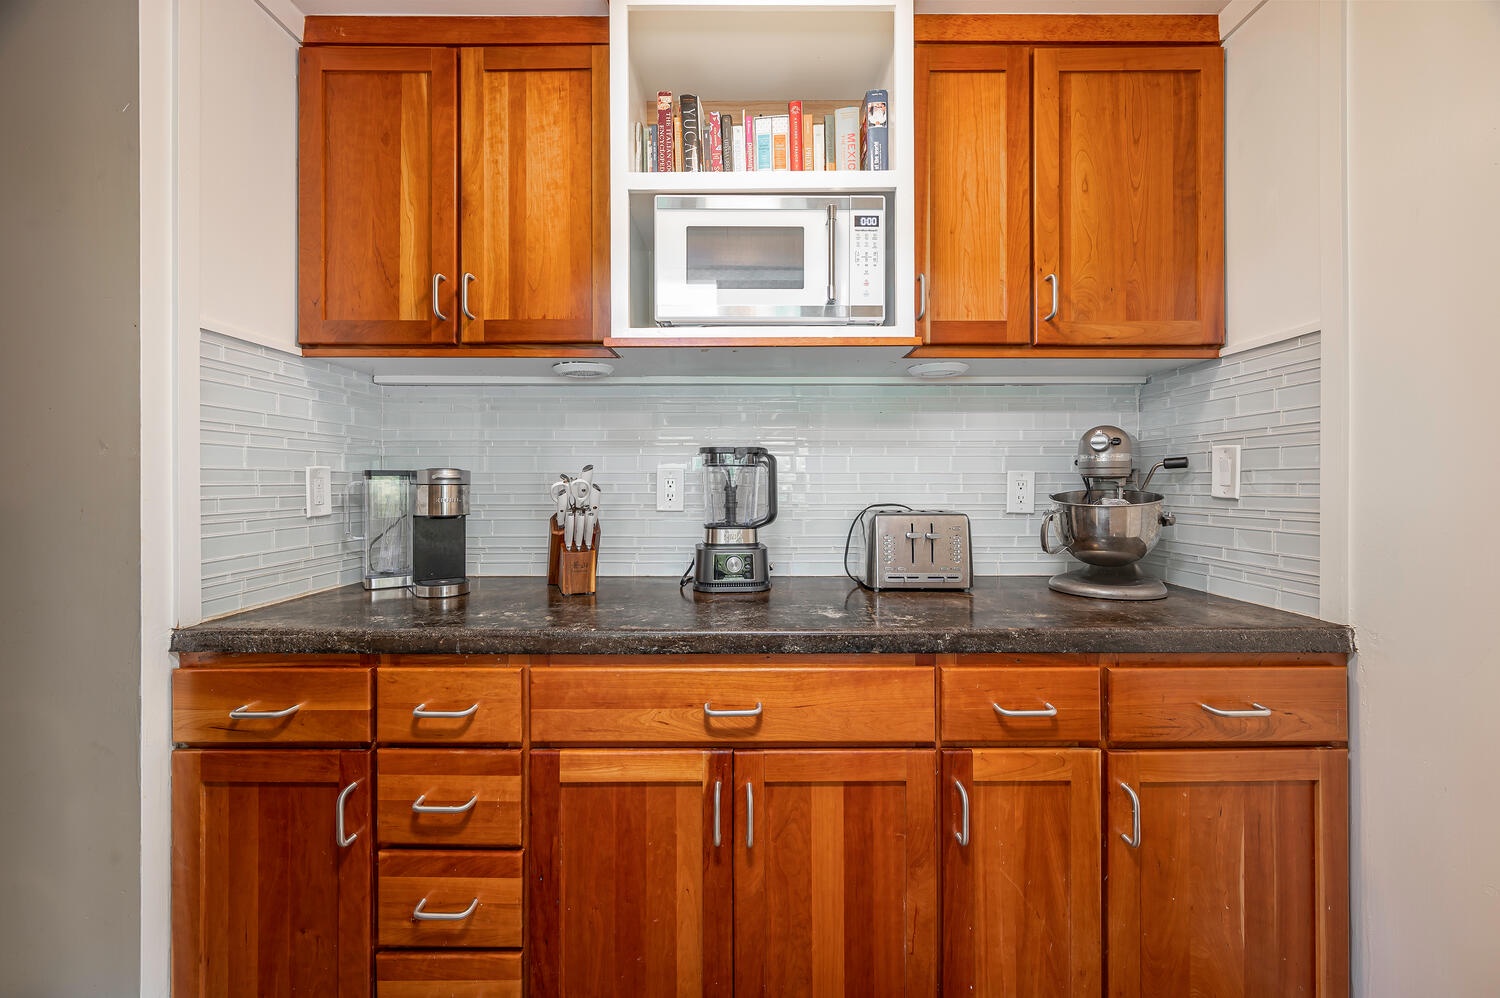 Haleiwa Vacation Rentals, Mele Makana - The kitchen also has a blender, toaster, mixer, coffee maker, and more